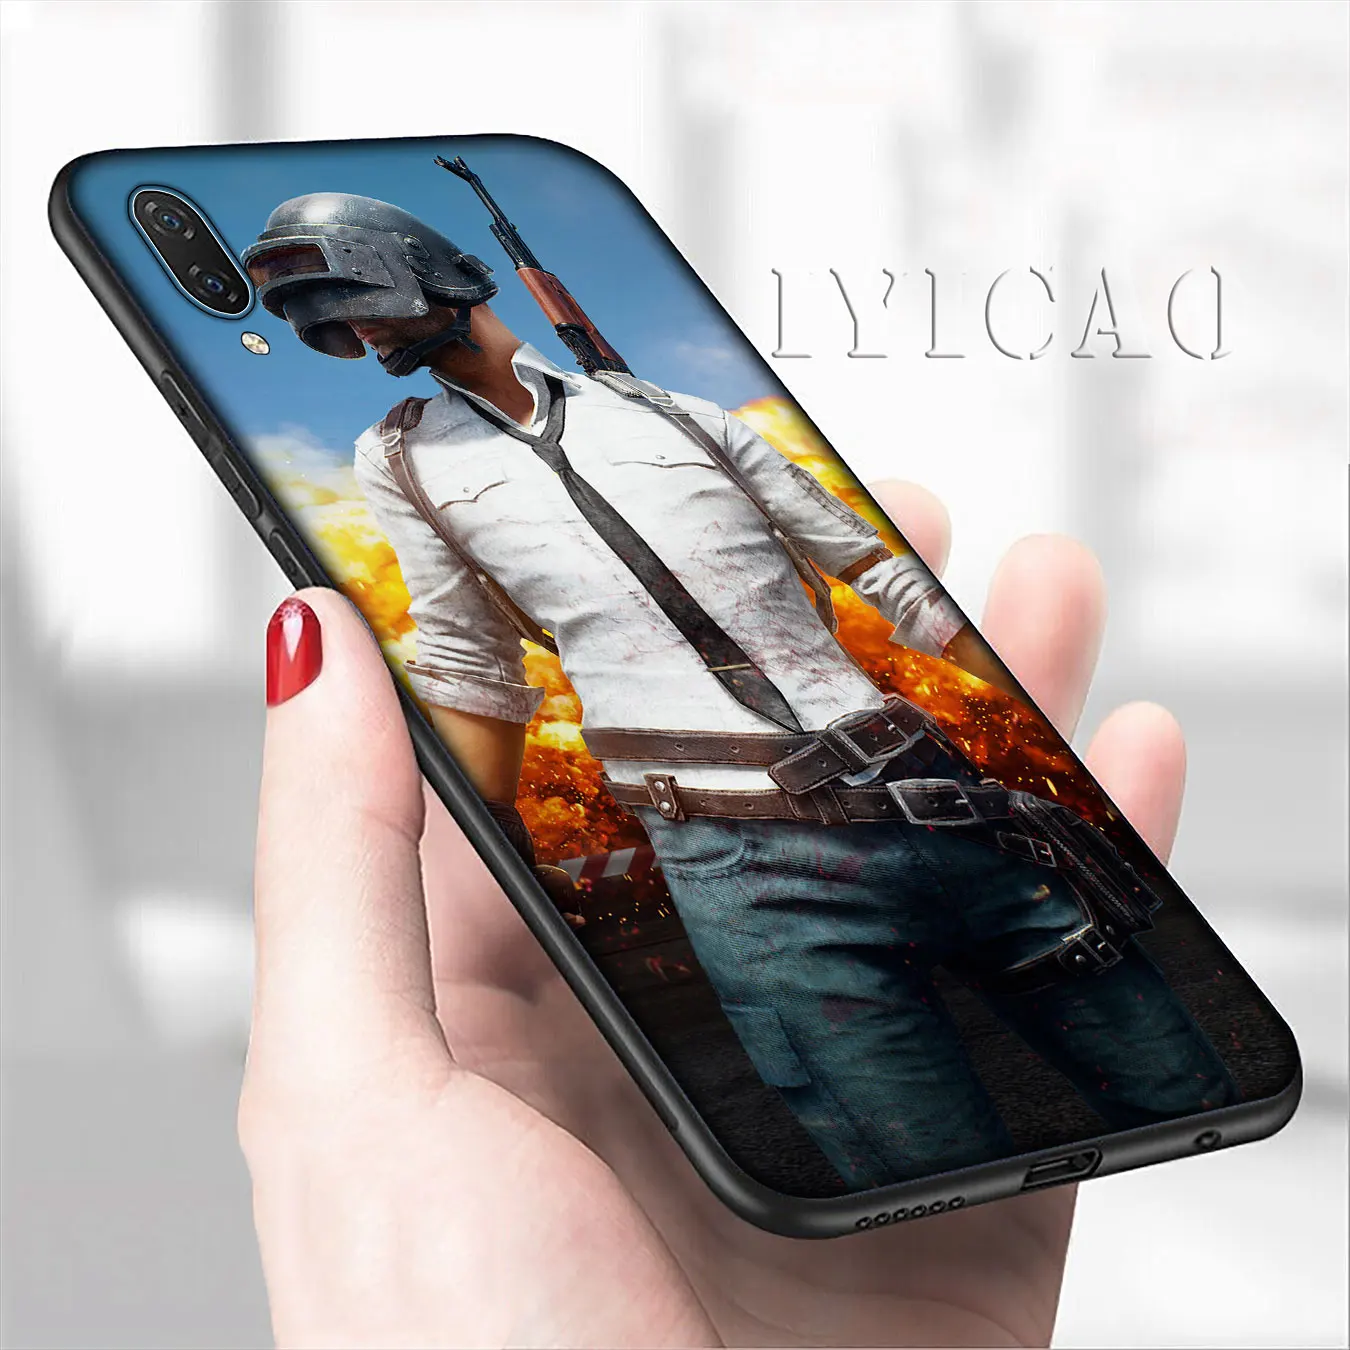 IYICAO PUBG 98K Game Art Soft Phone Case for Xiaomi Mi 10 9 9T A3 Pro CC9 CC9E 8 SE A2 Lite A1 6 pocophone f1 Mi9 | - Фото №1